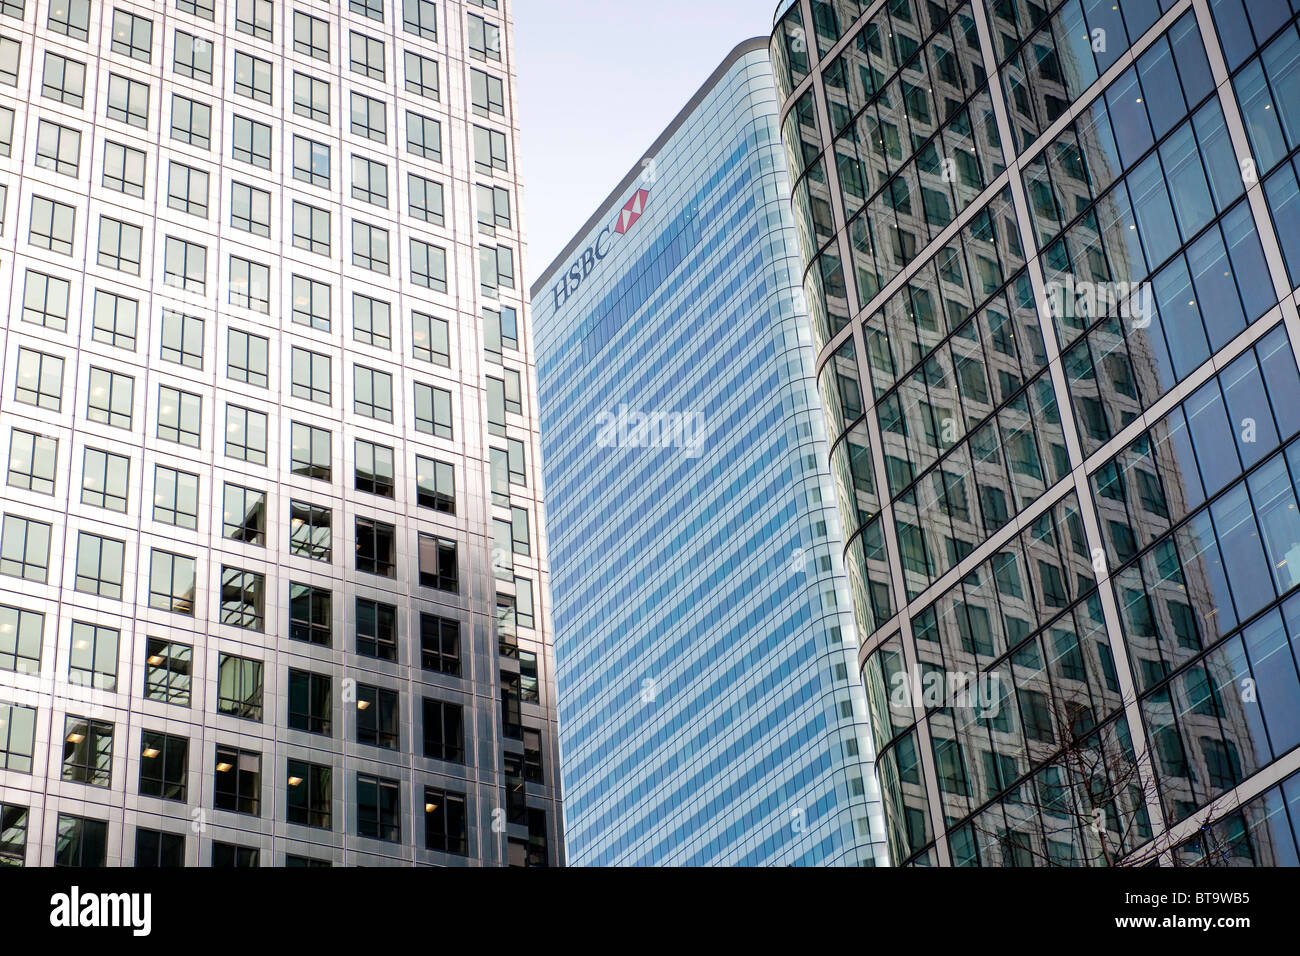 Canary Wharf, Financial district in London, UK Stock Photo